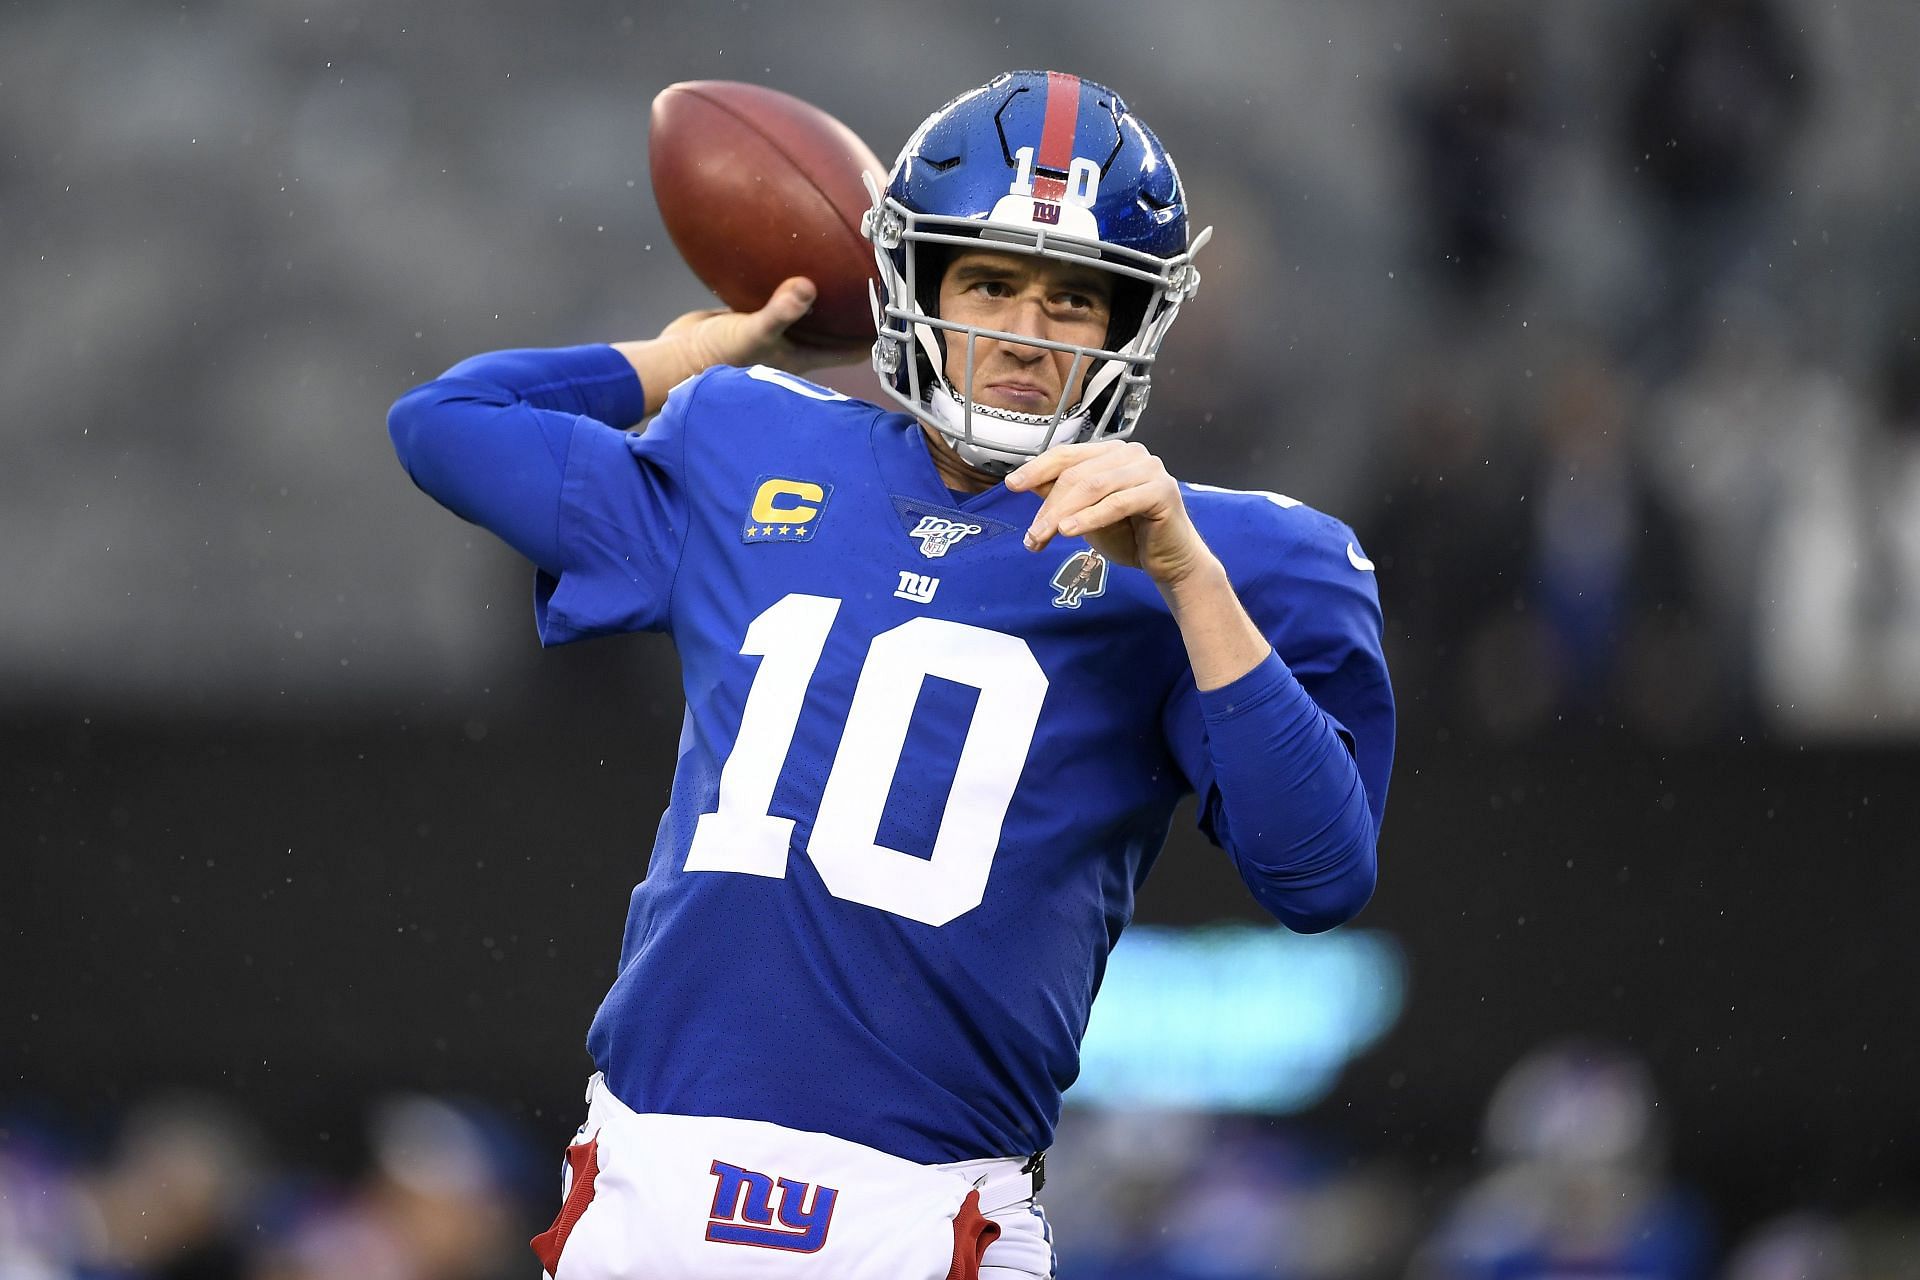 Eli Manning overcame his disappointing rookie season